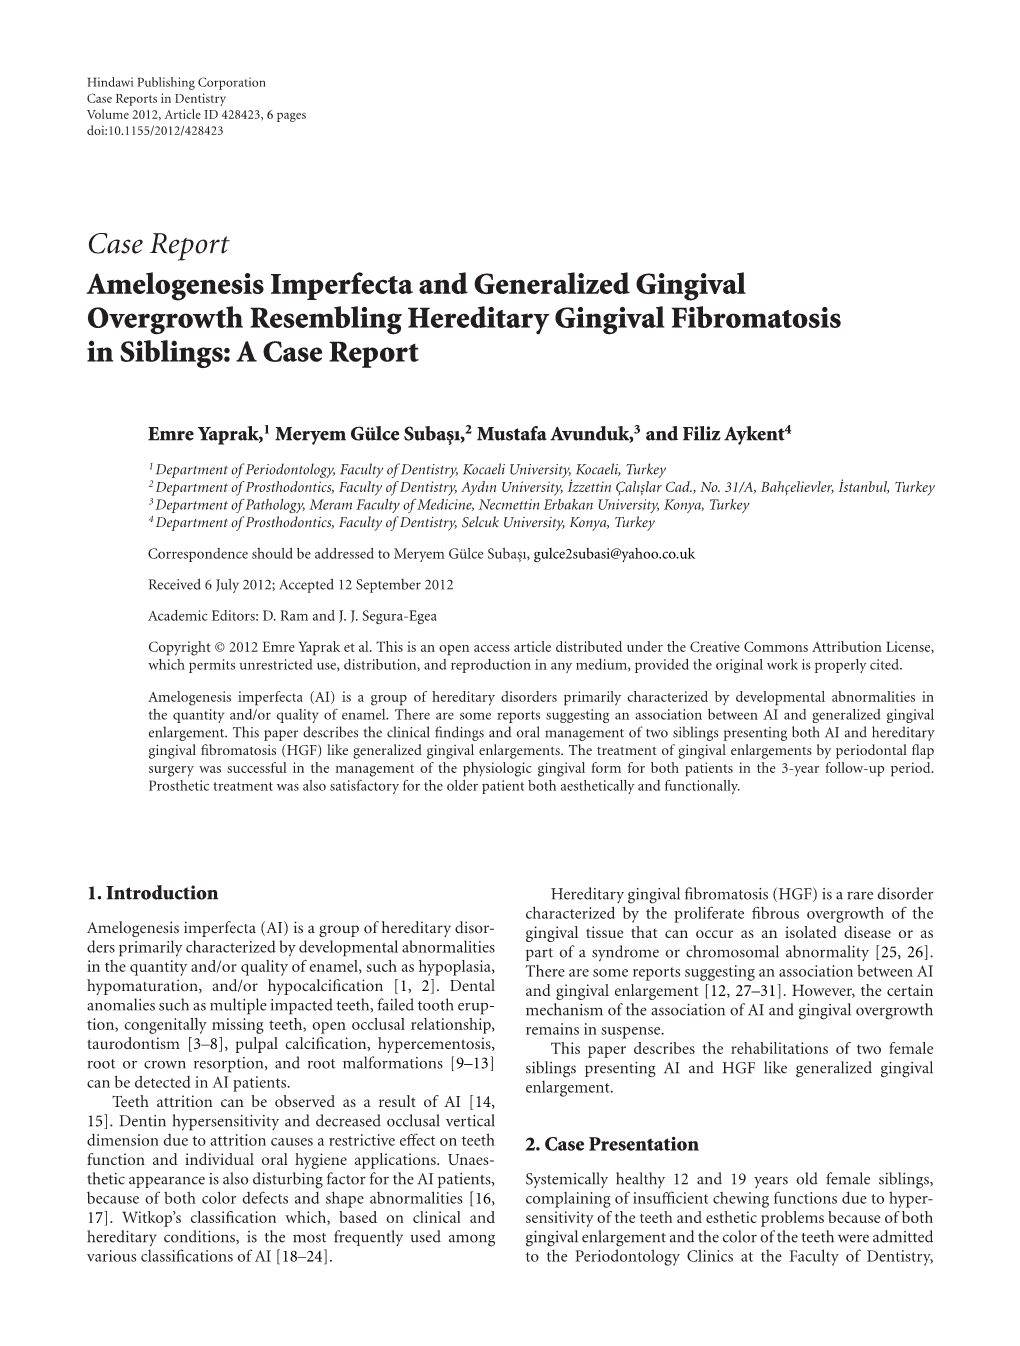 Amelogenesis Imperfecta and Generalized Gingival Overgrowth Resembling Hereditary Gingival Fibromatosis in Siblings: a Case Report